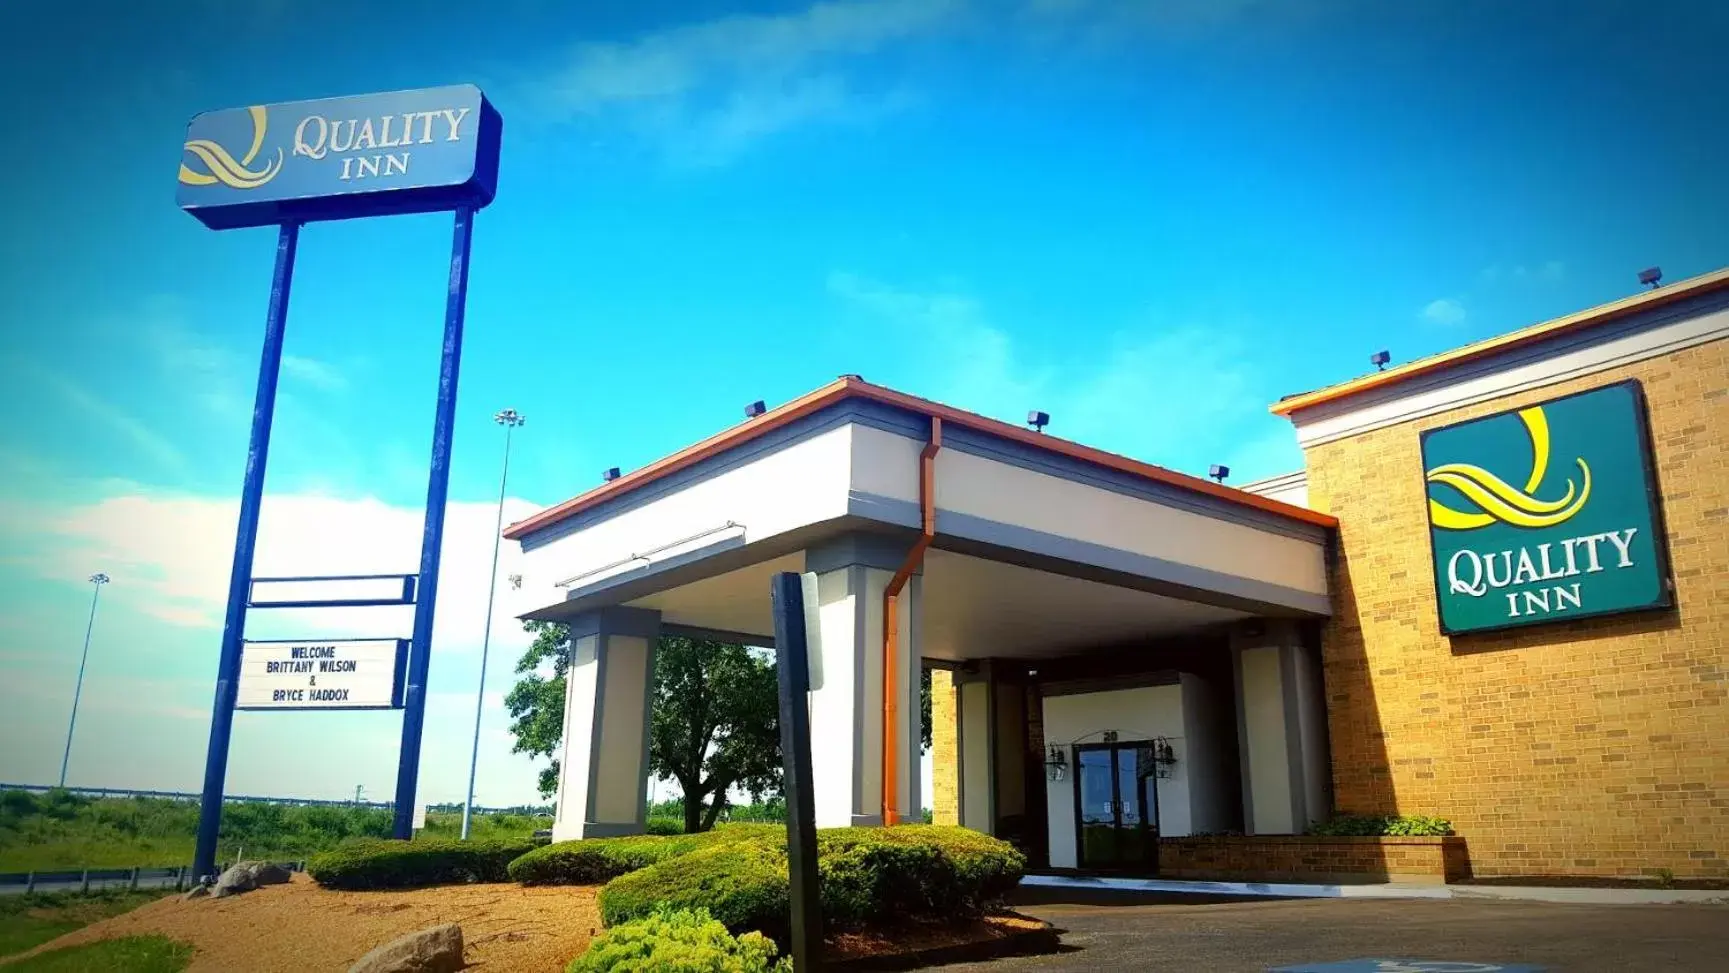 Property Building in Quality Inn- Chillicothe